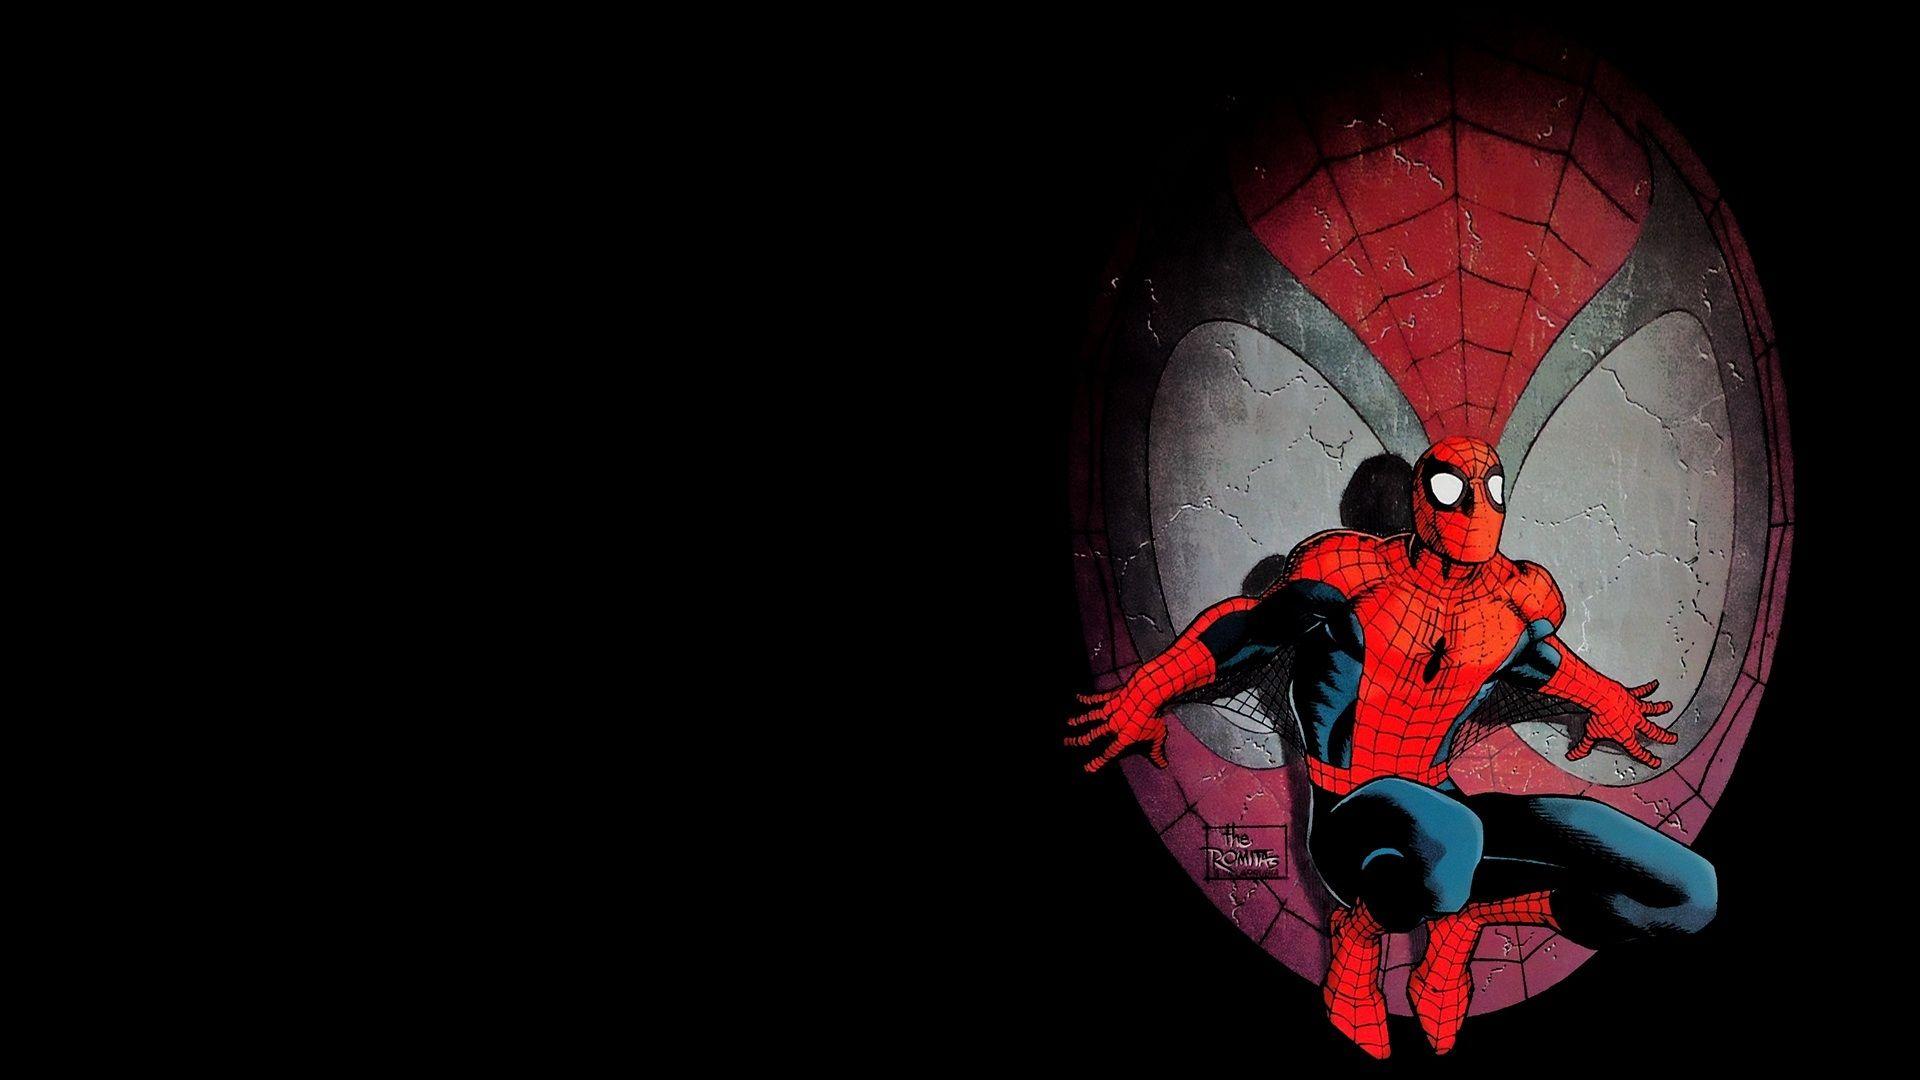 Collection of Cool Spiderman Wallpaper on HDWallpaper 1920x1080